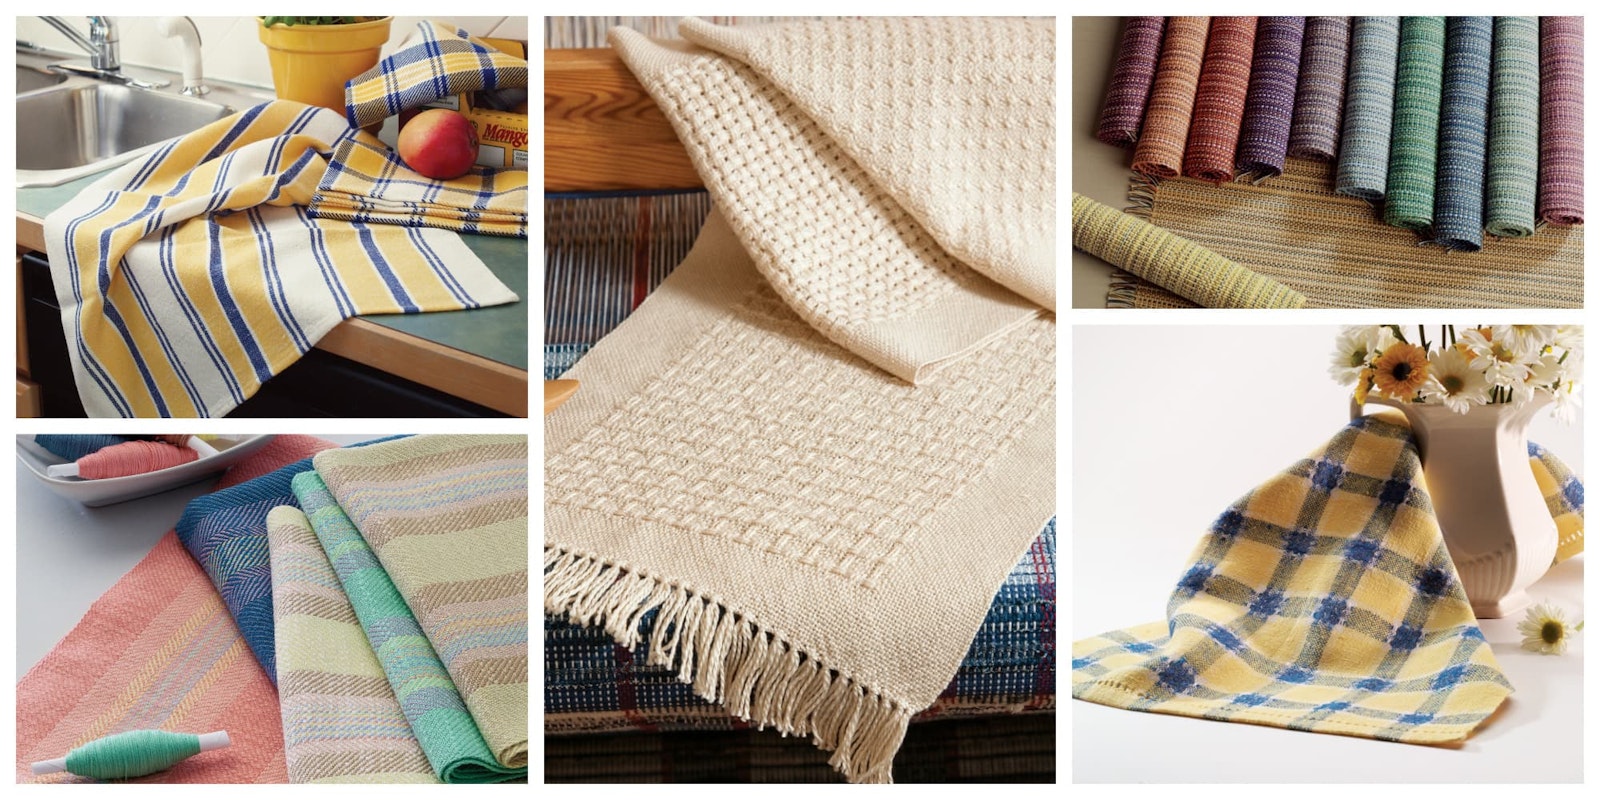 5 Fun (And Free) Weaving Projects: Handwoven Towels and Placemats | Handwoven